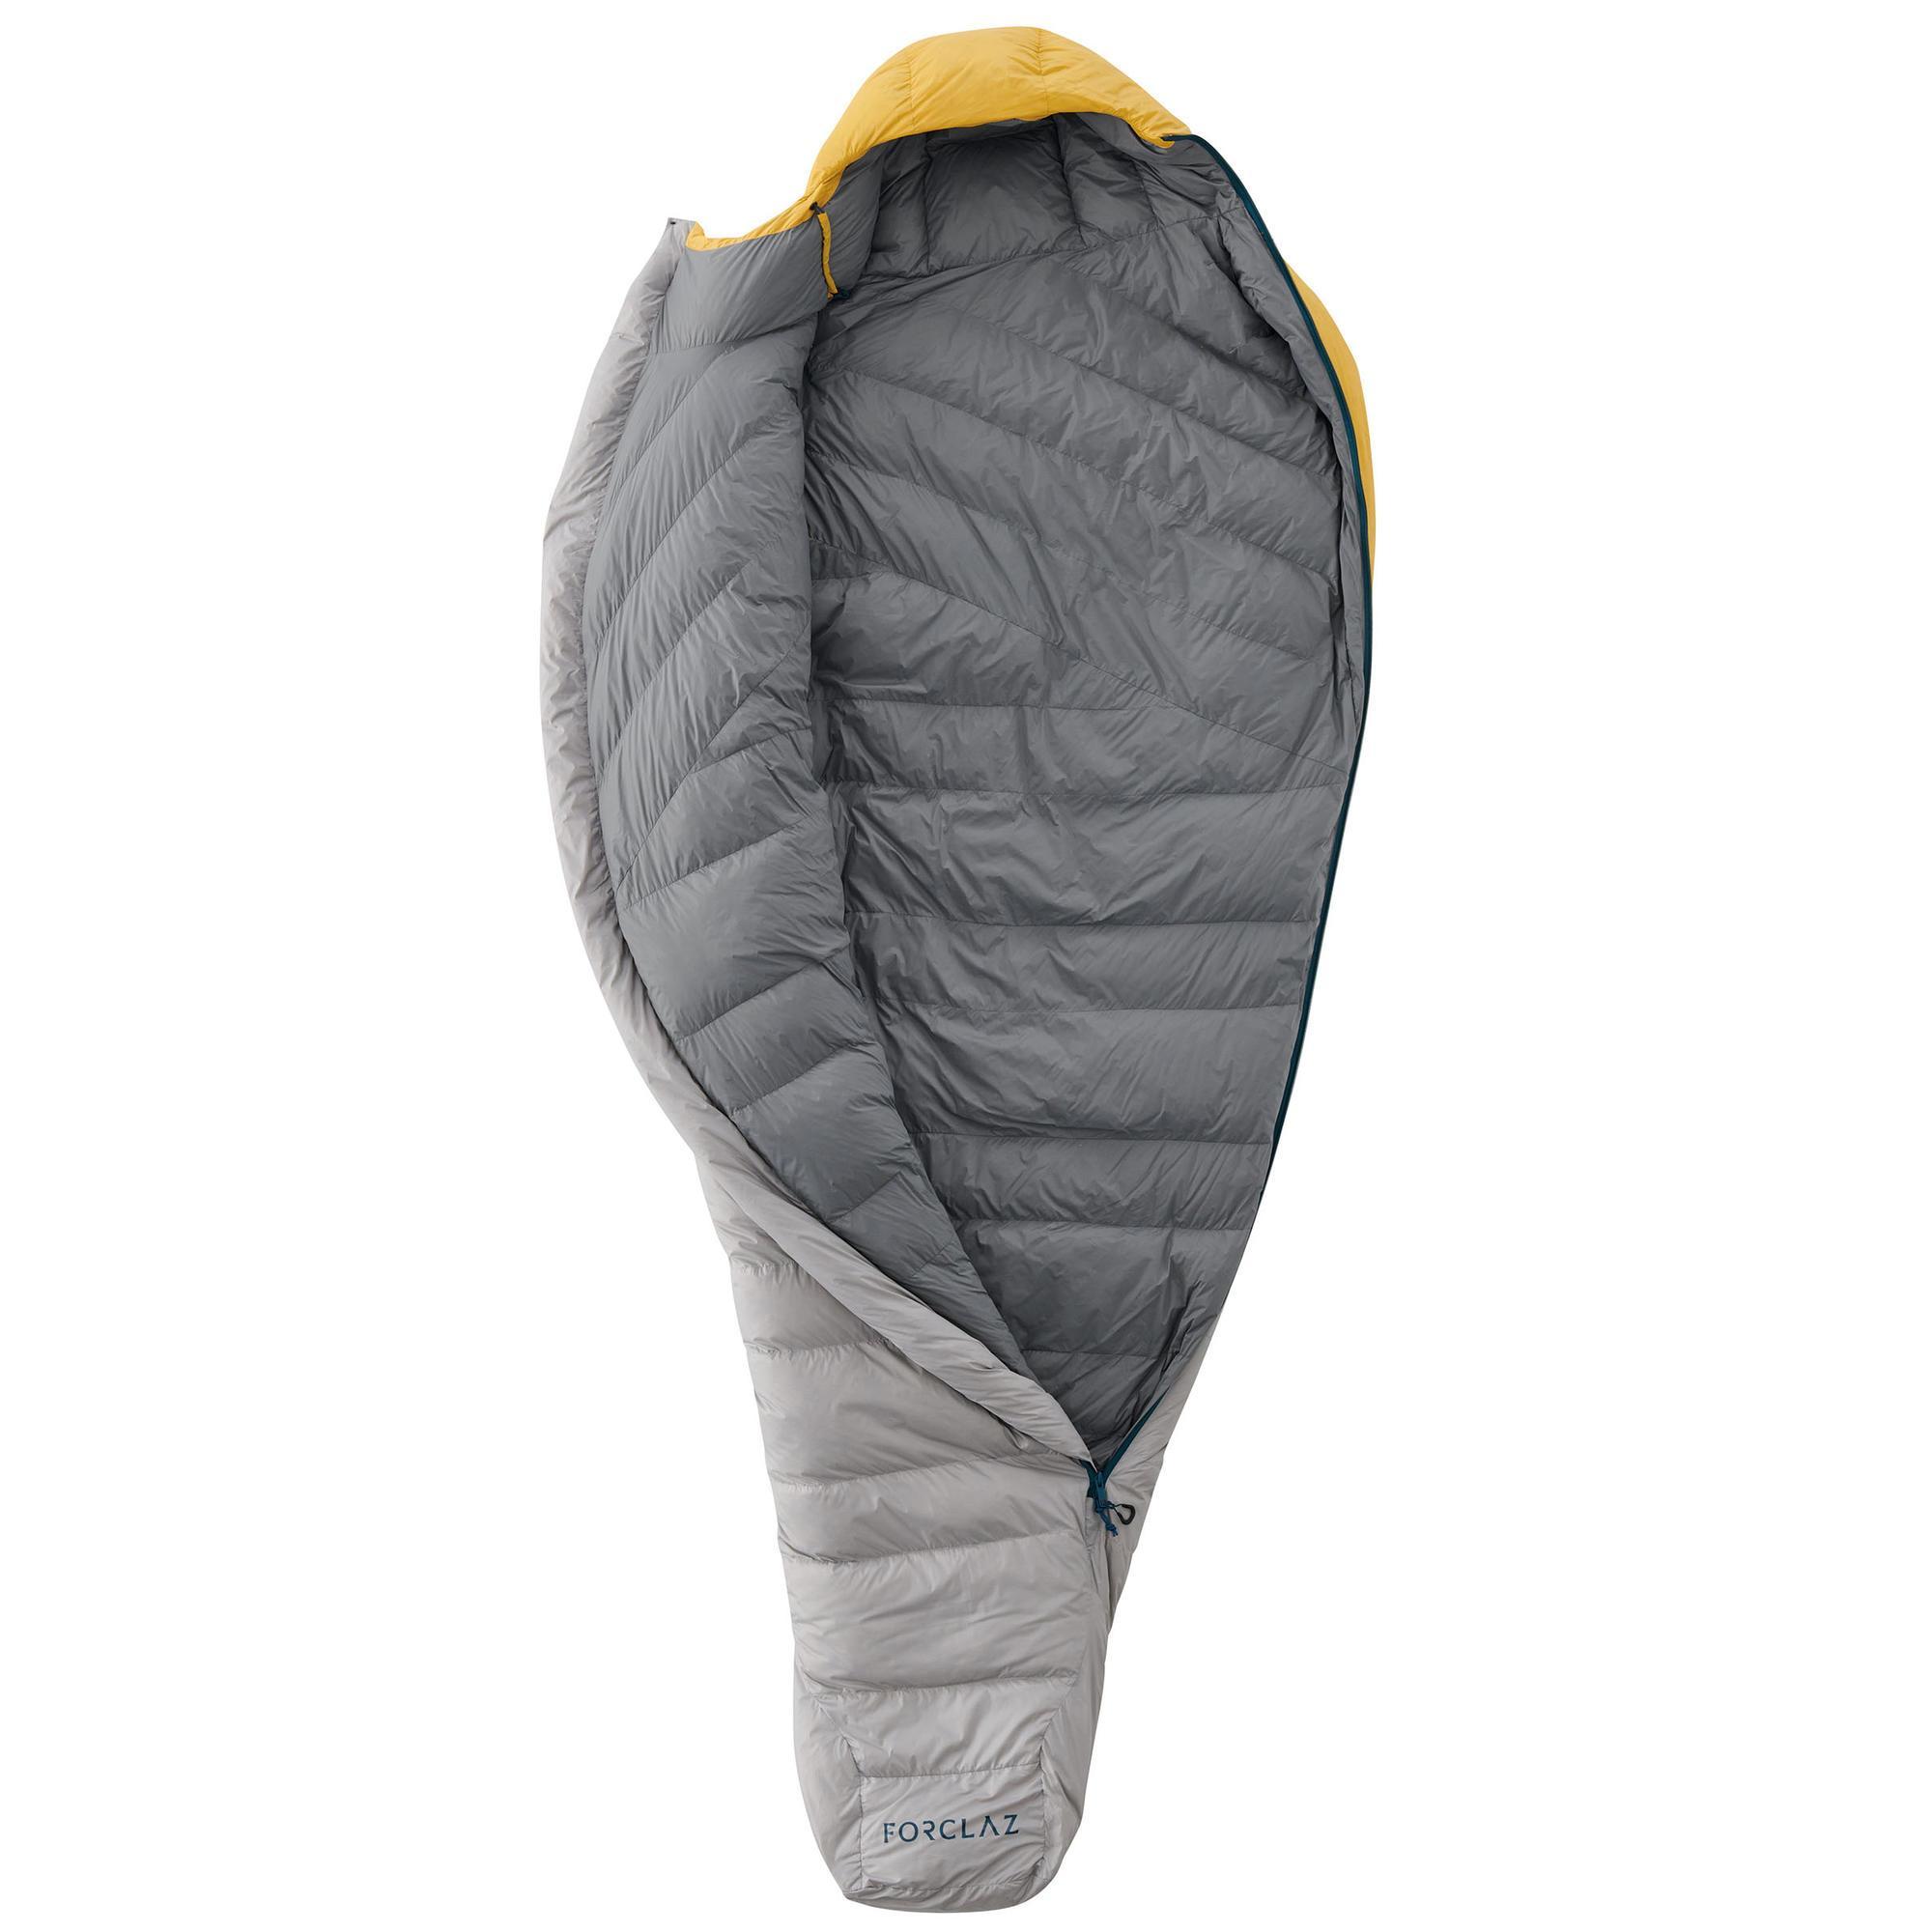 forclaz 900 sleeping bag review